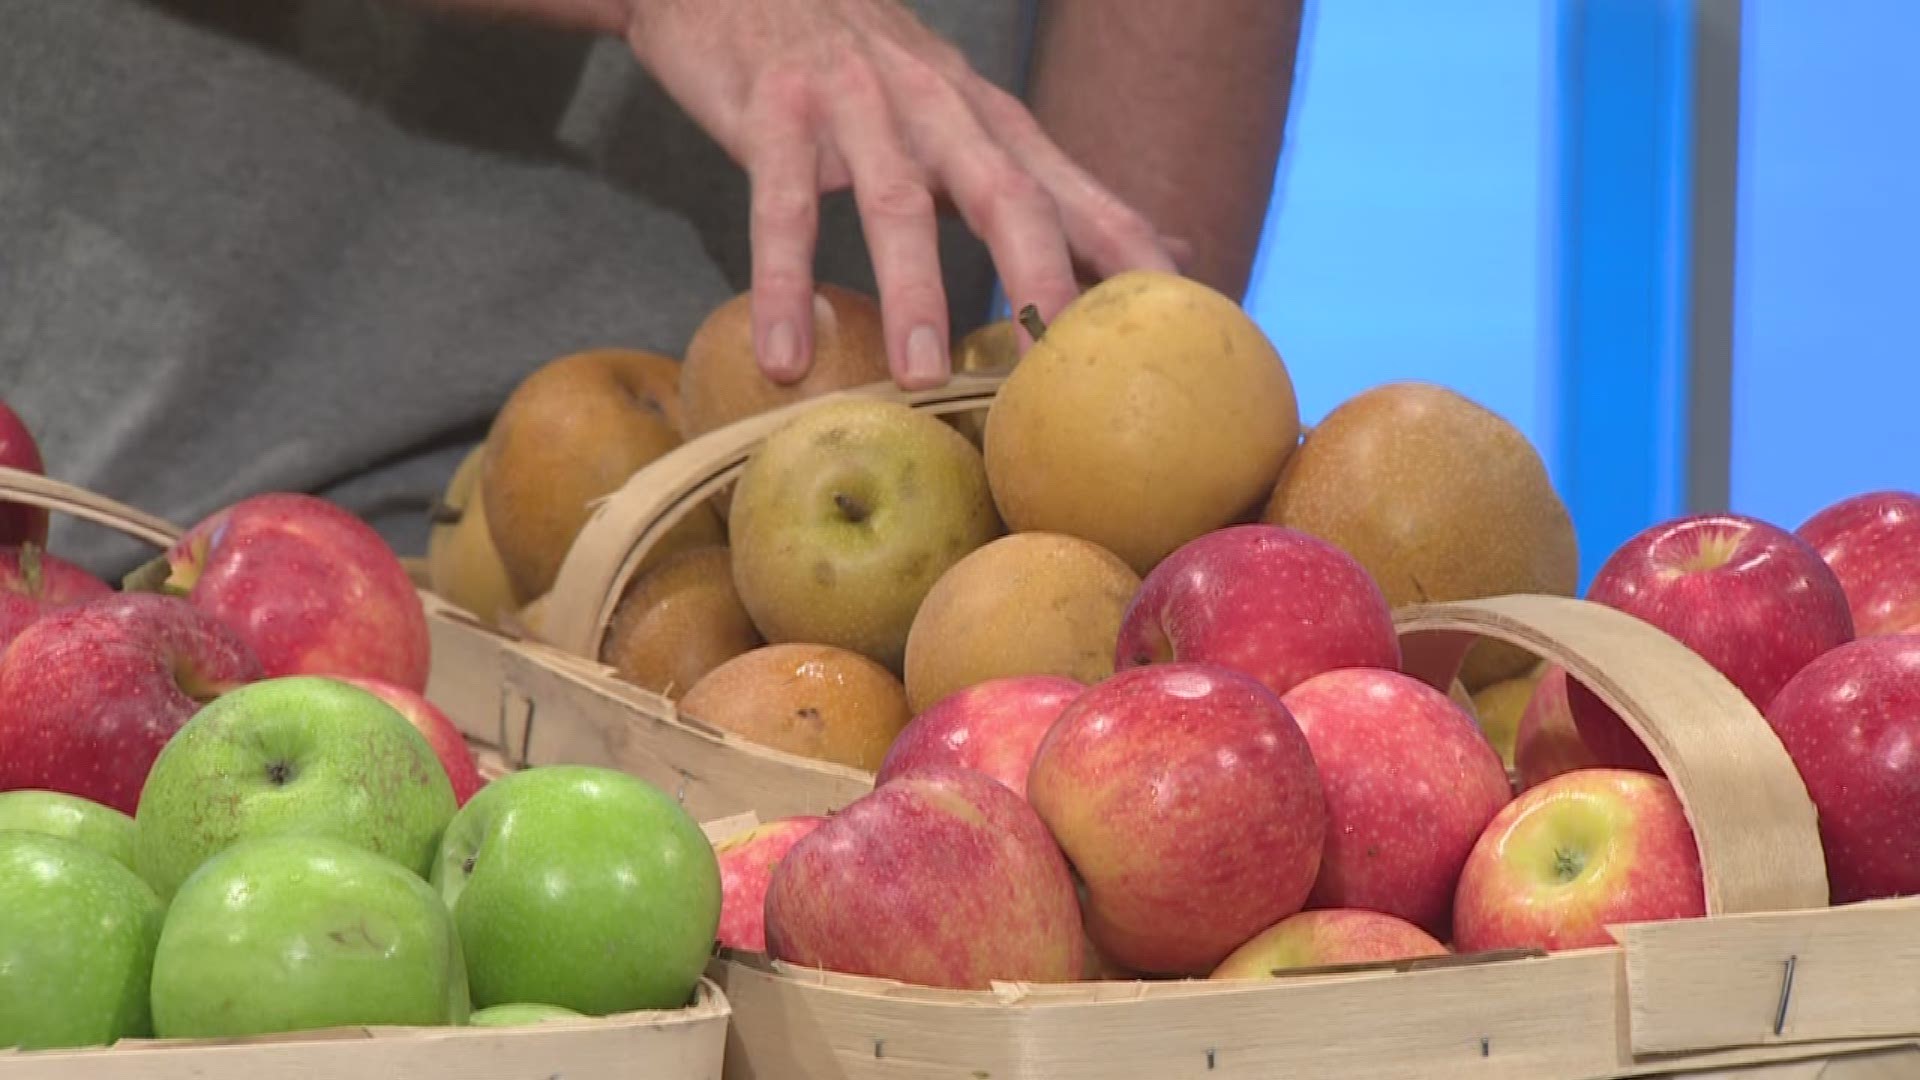 Jason stone from unity farms has a variety of apples. 